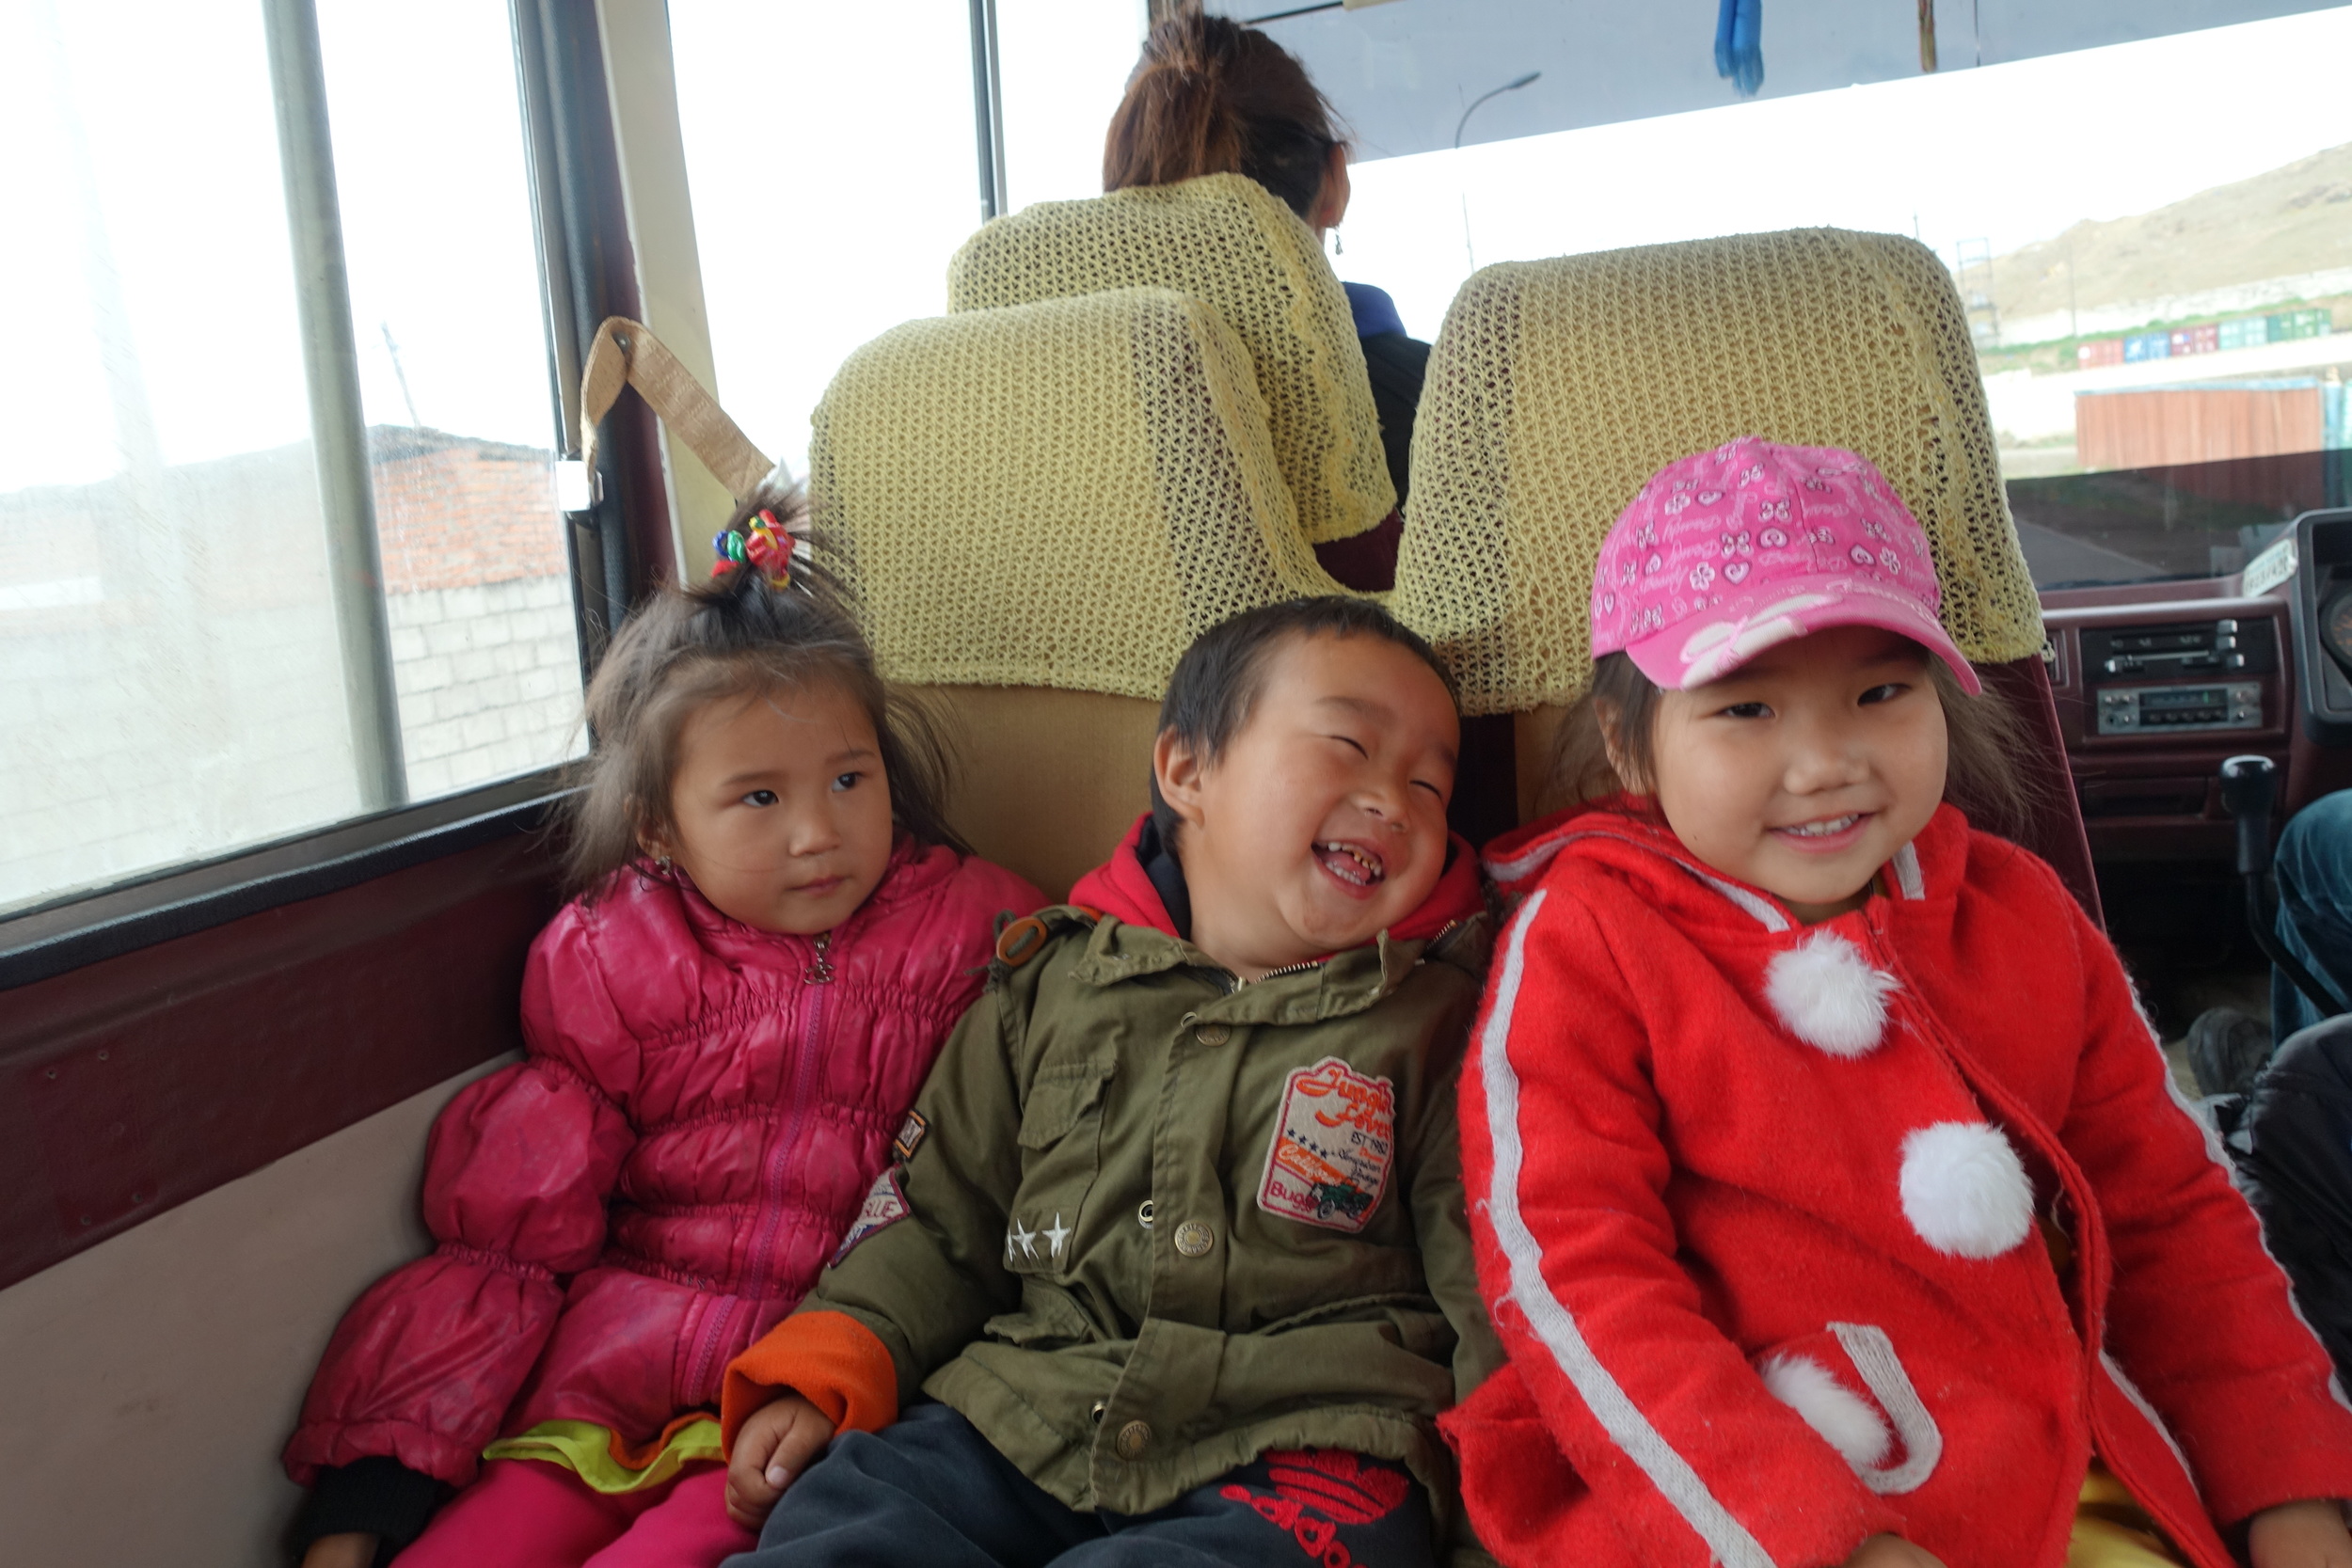 40 kids in a bus made for 20